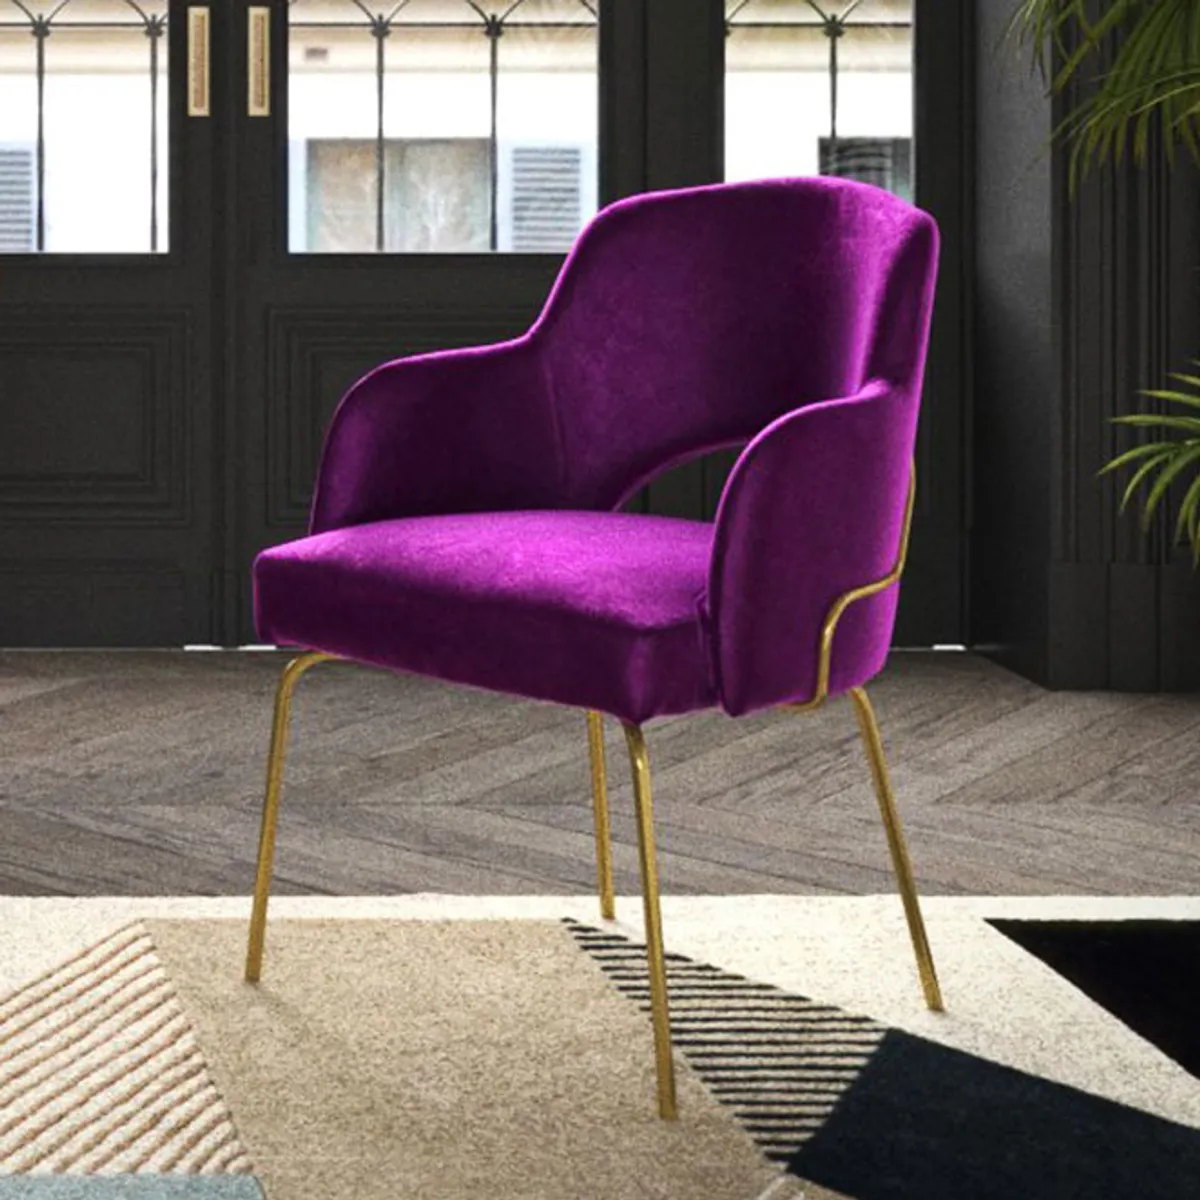 Halle Metal Peep Armchair Situ Inside Out Contracts